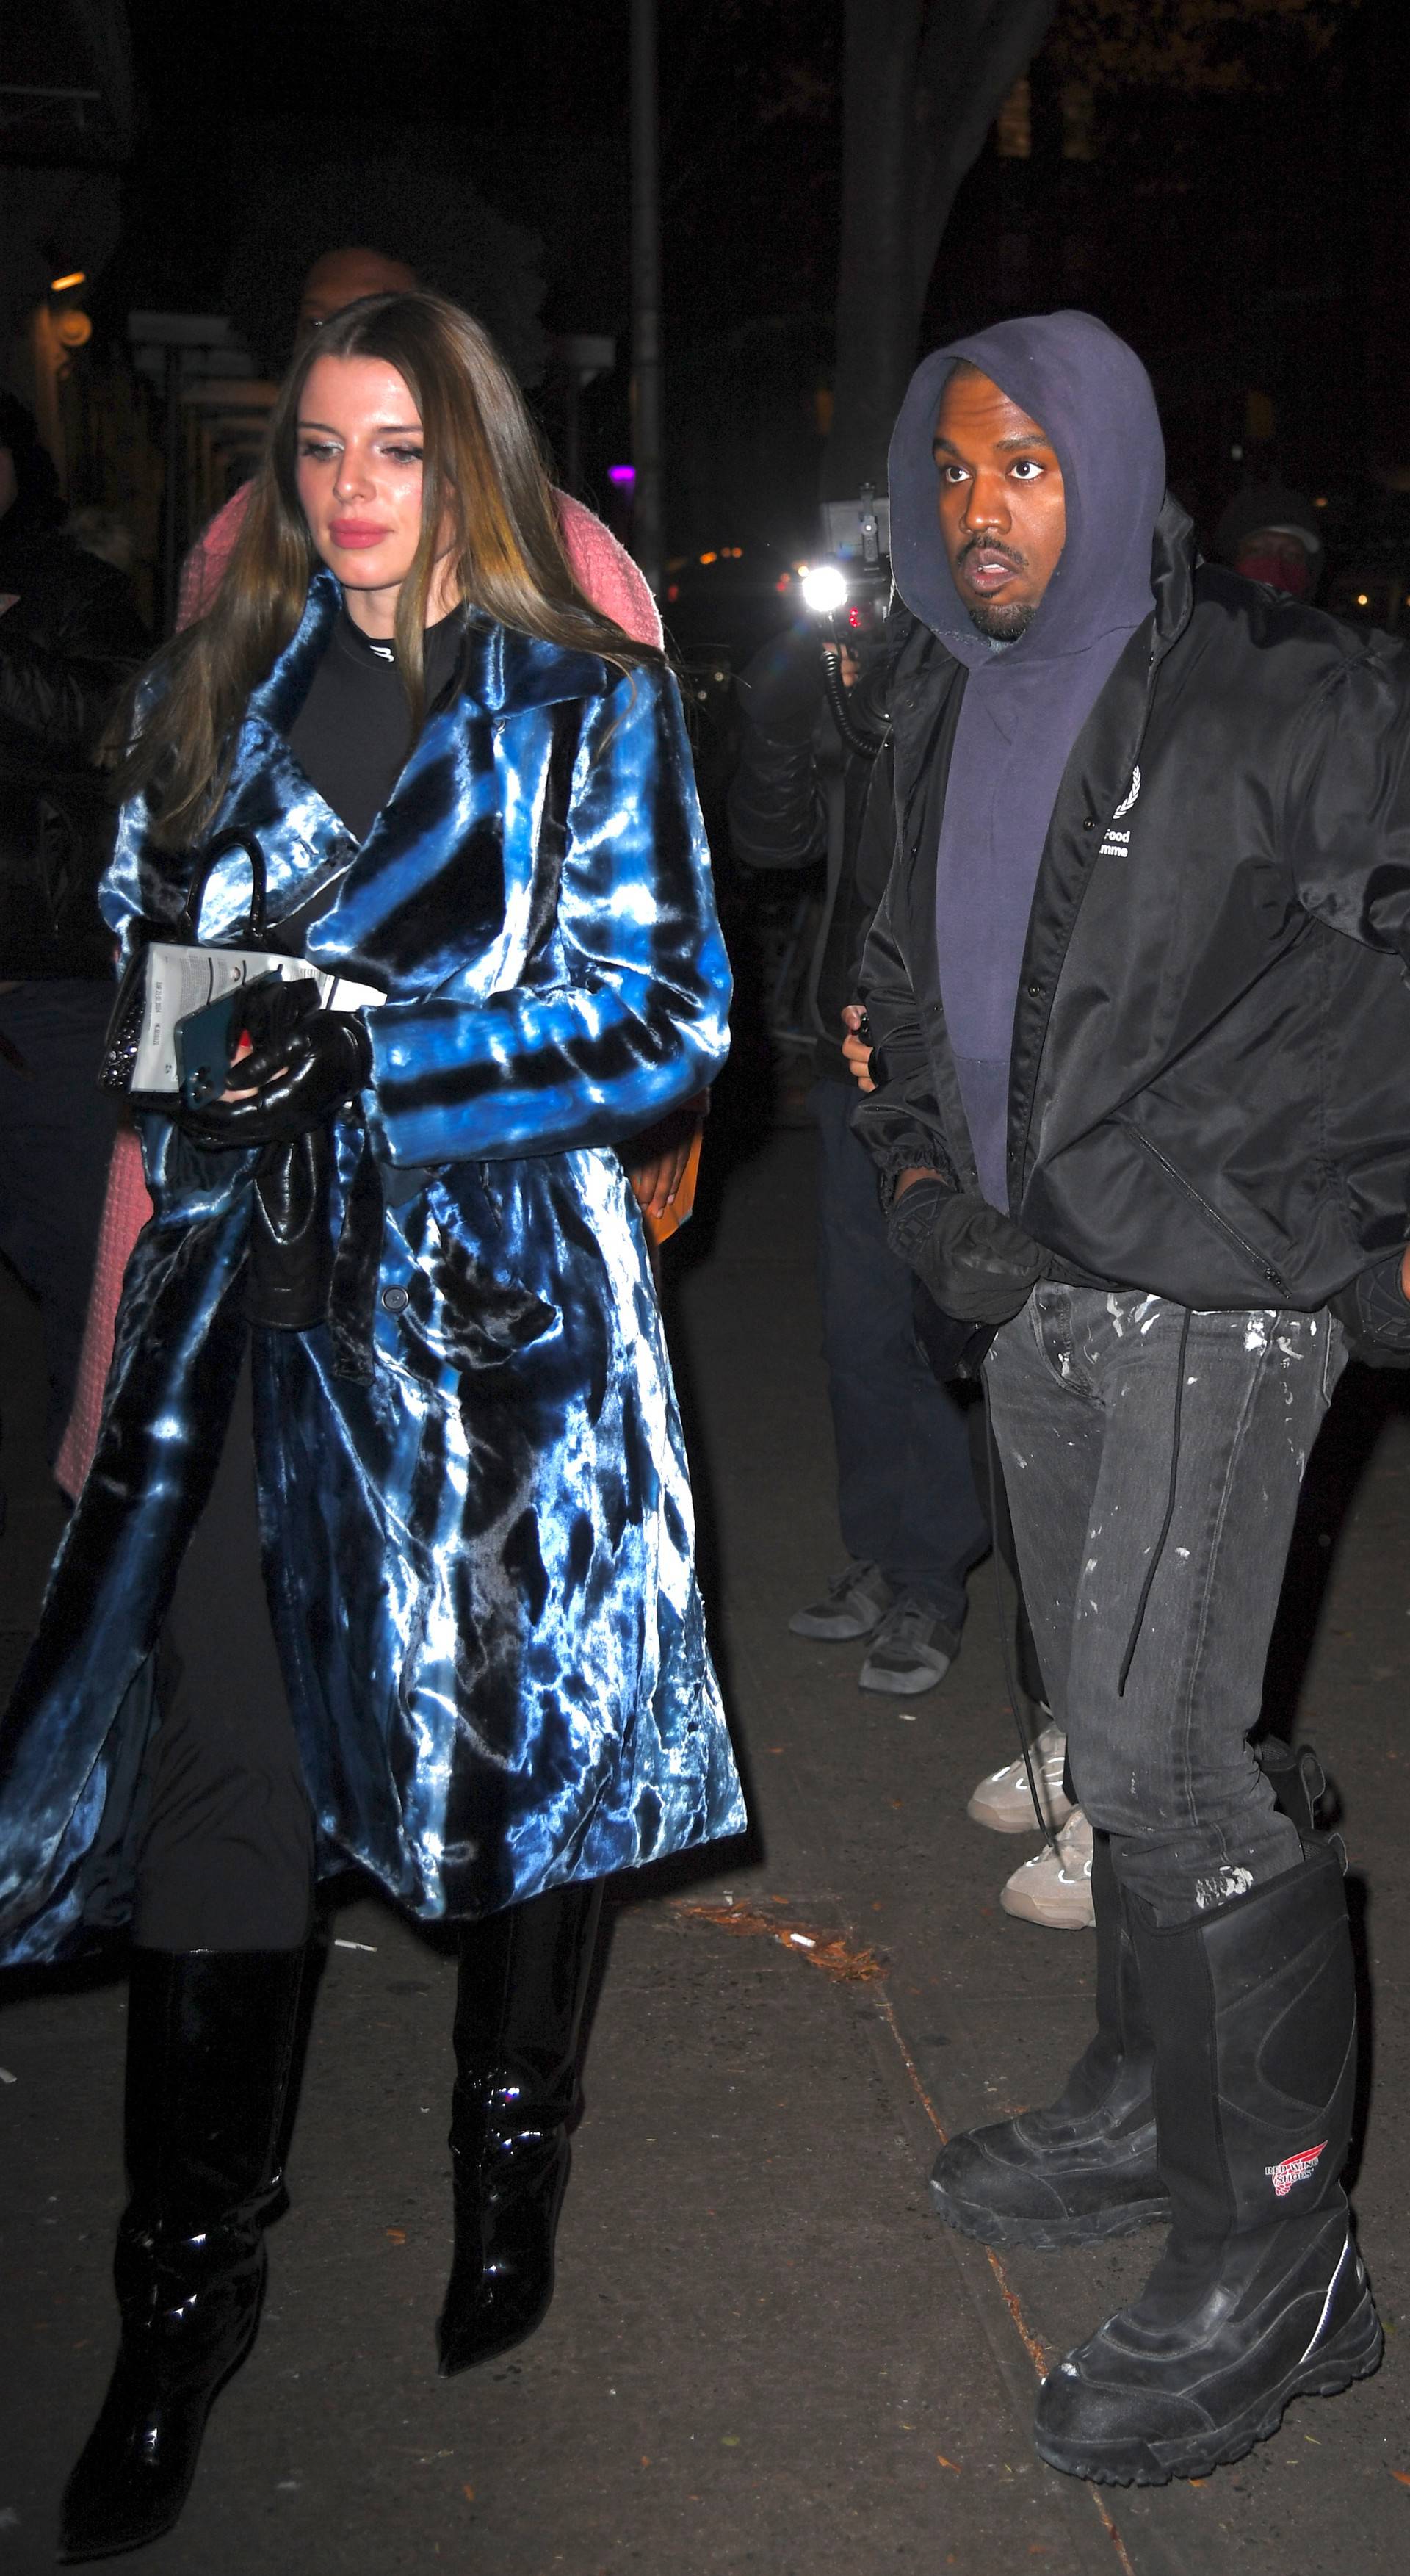 Kanye West Arriving At Carbone Restaurant In New York City With Unidentified Women As His Date And Friends Tonight In New York City